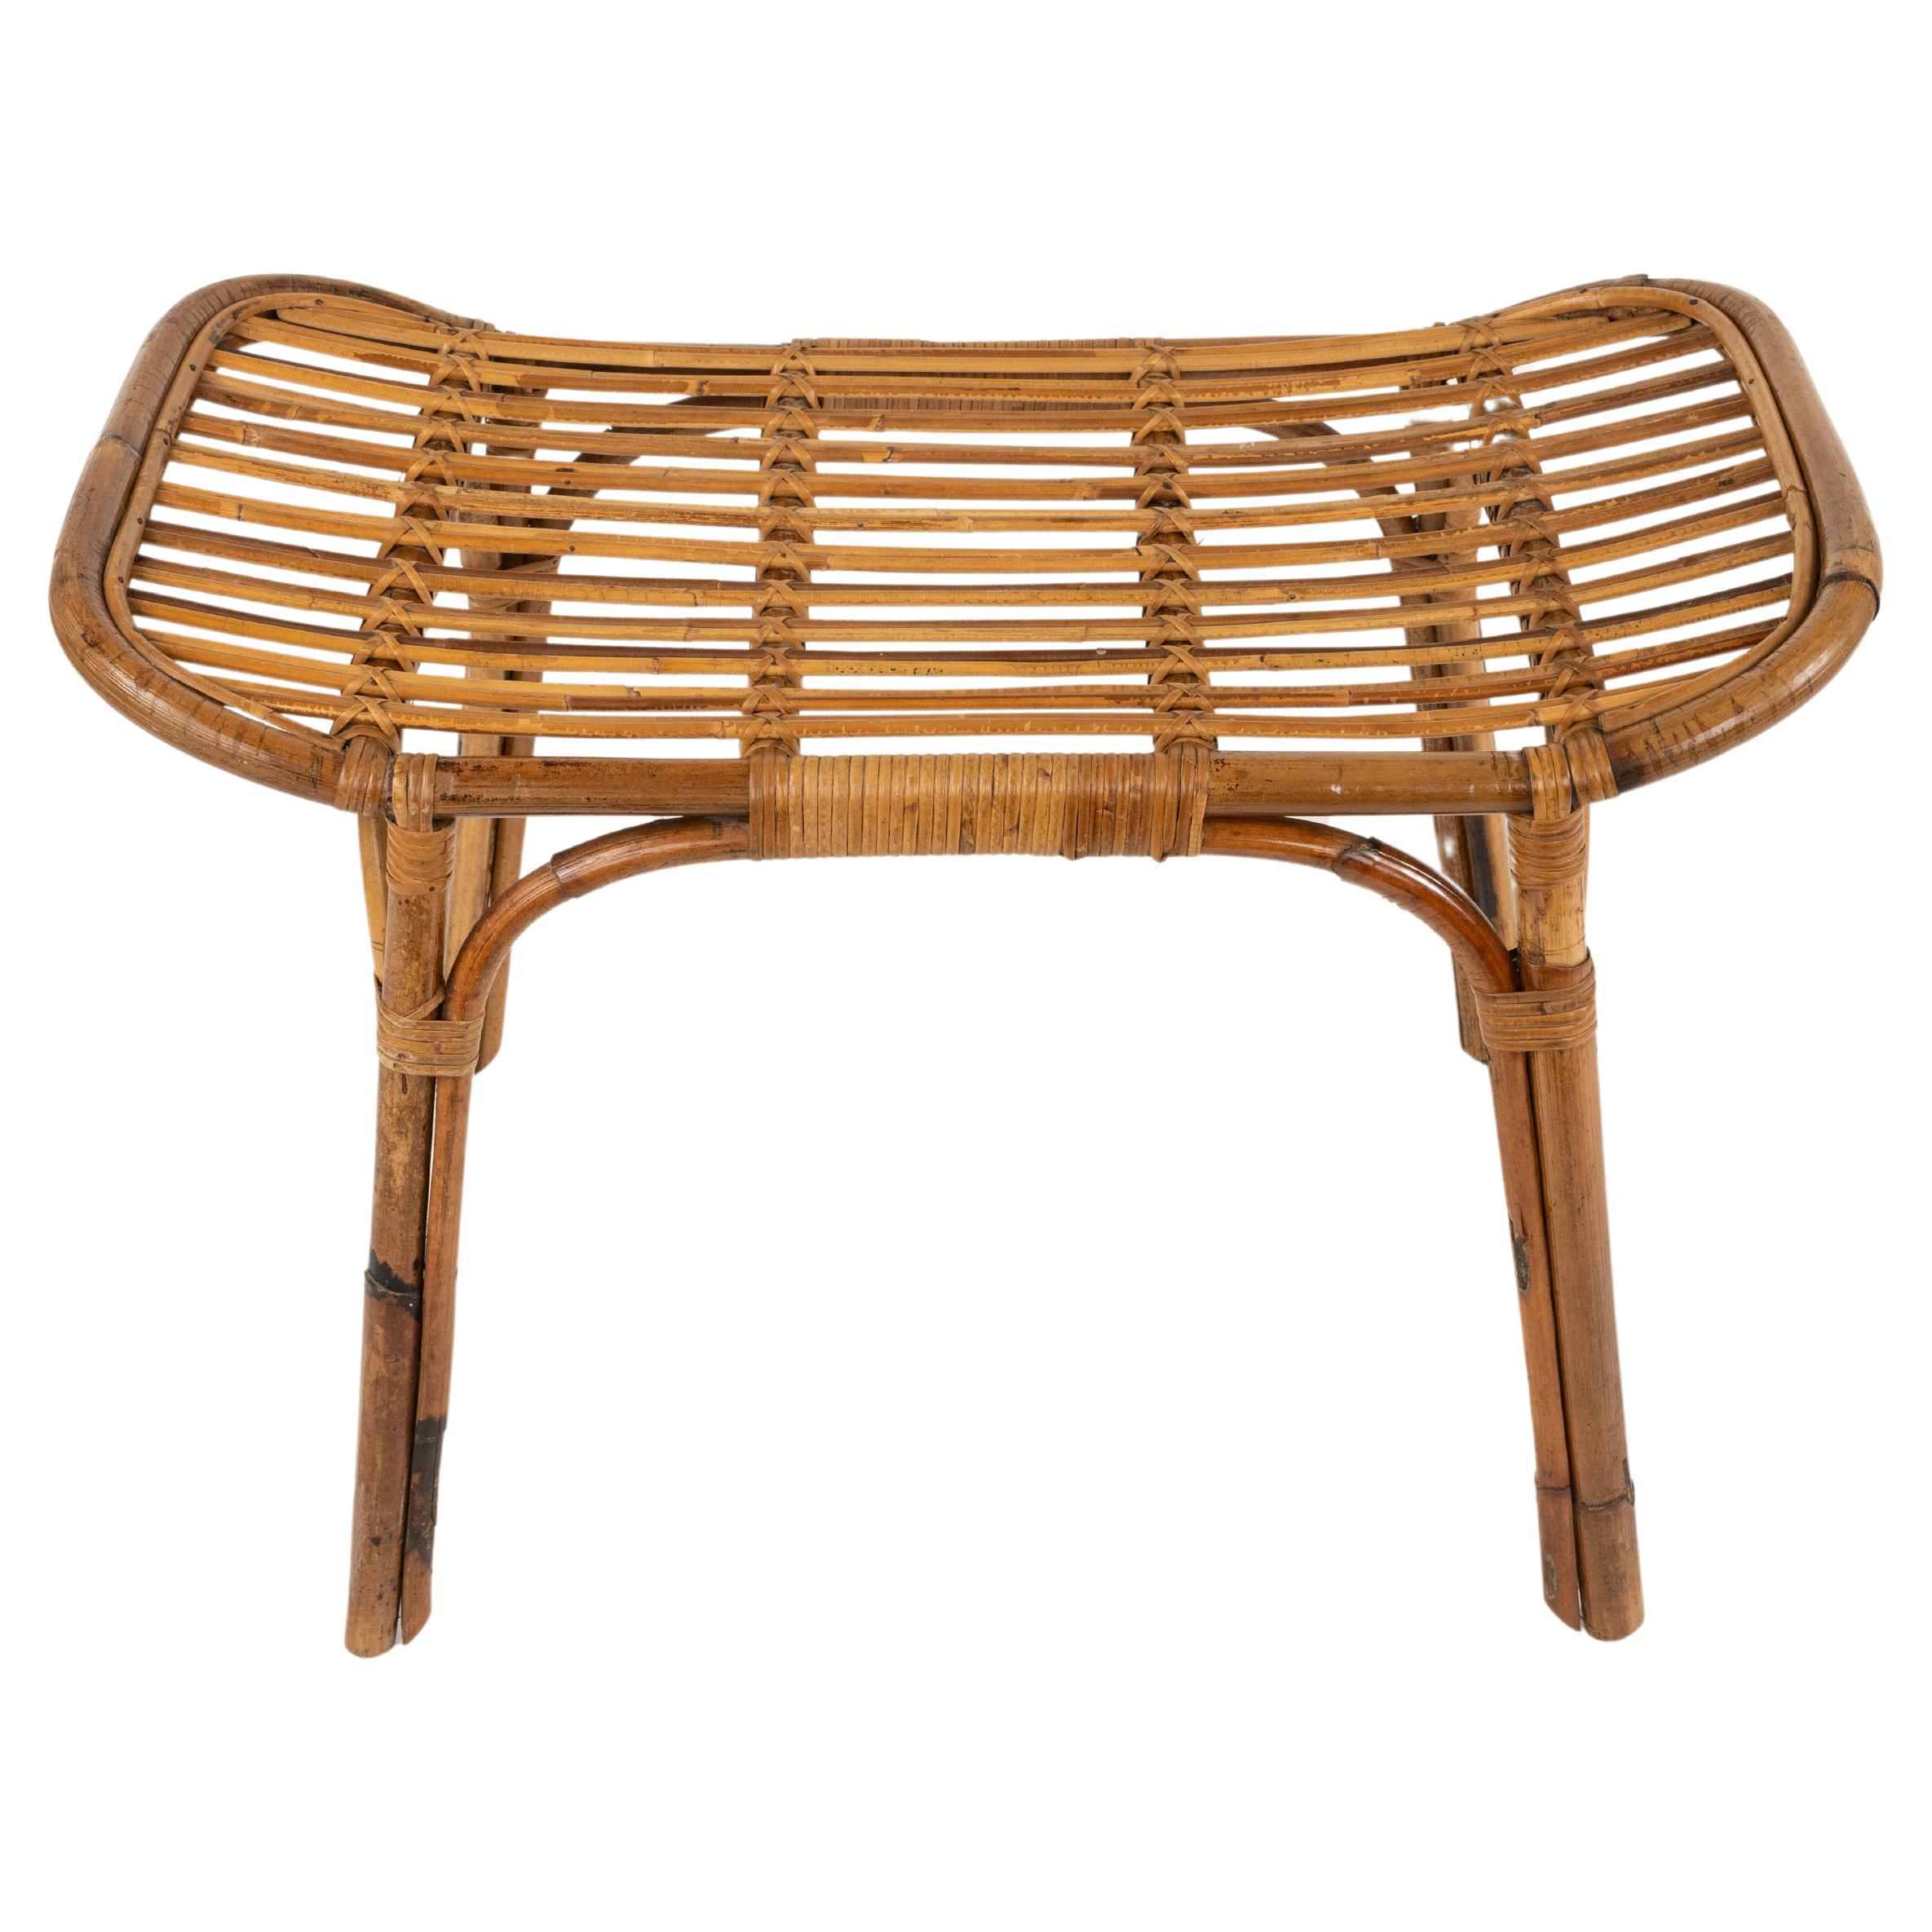 Midcentury Bench or Side Table in Rattan & Bamboo Tito Agnoli Style, Italy 1960s